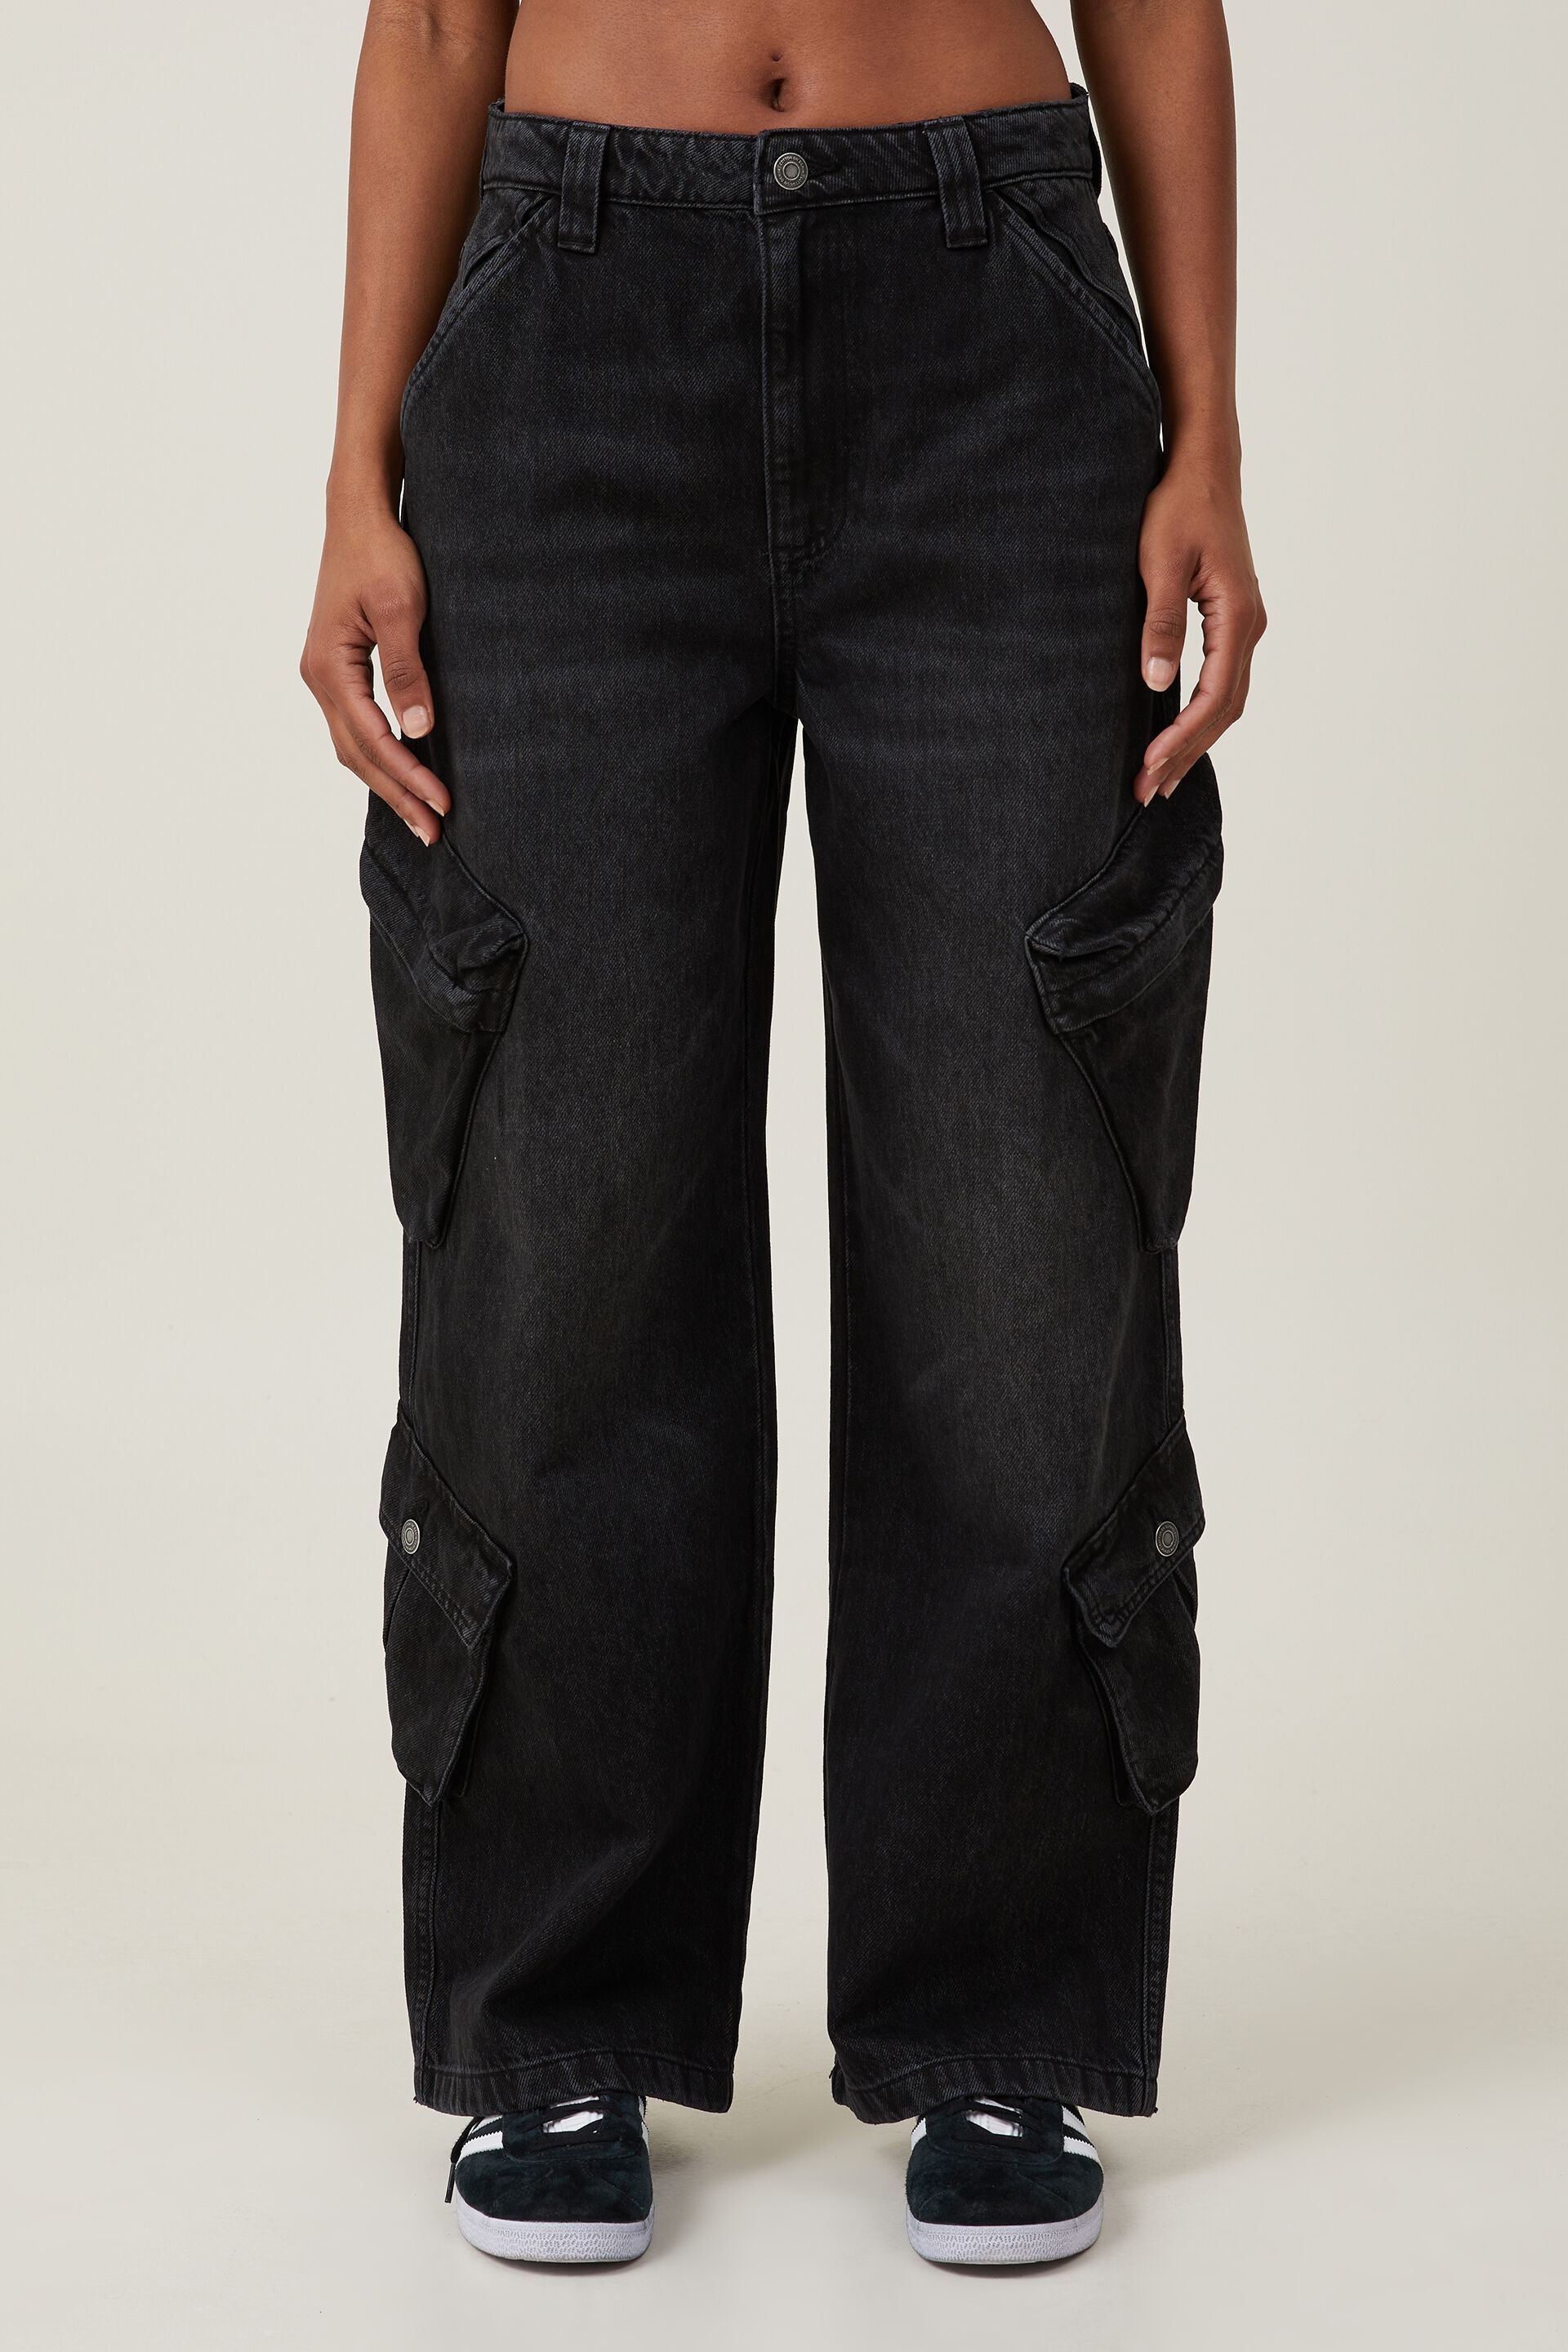 COLLUSION 90s baggy pants in black | ASOS